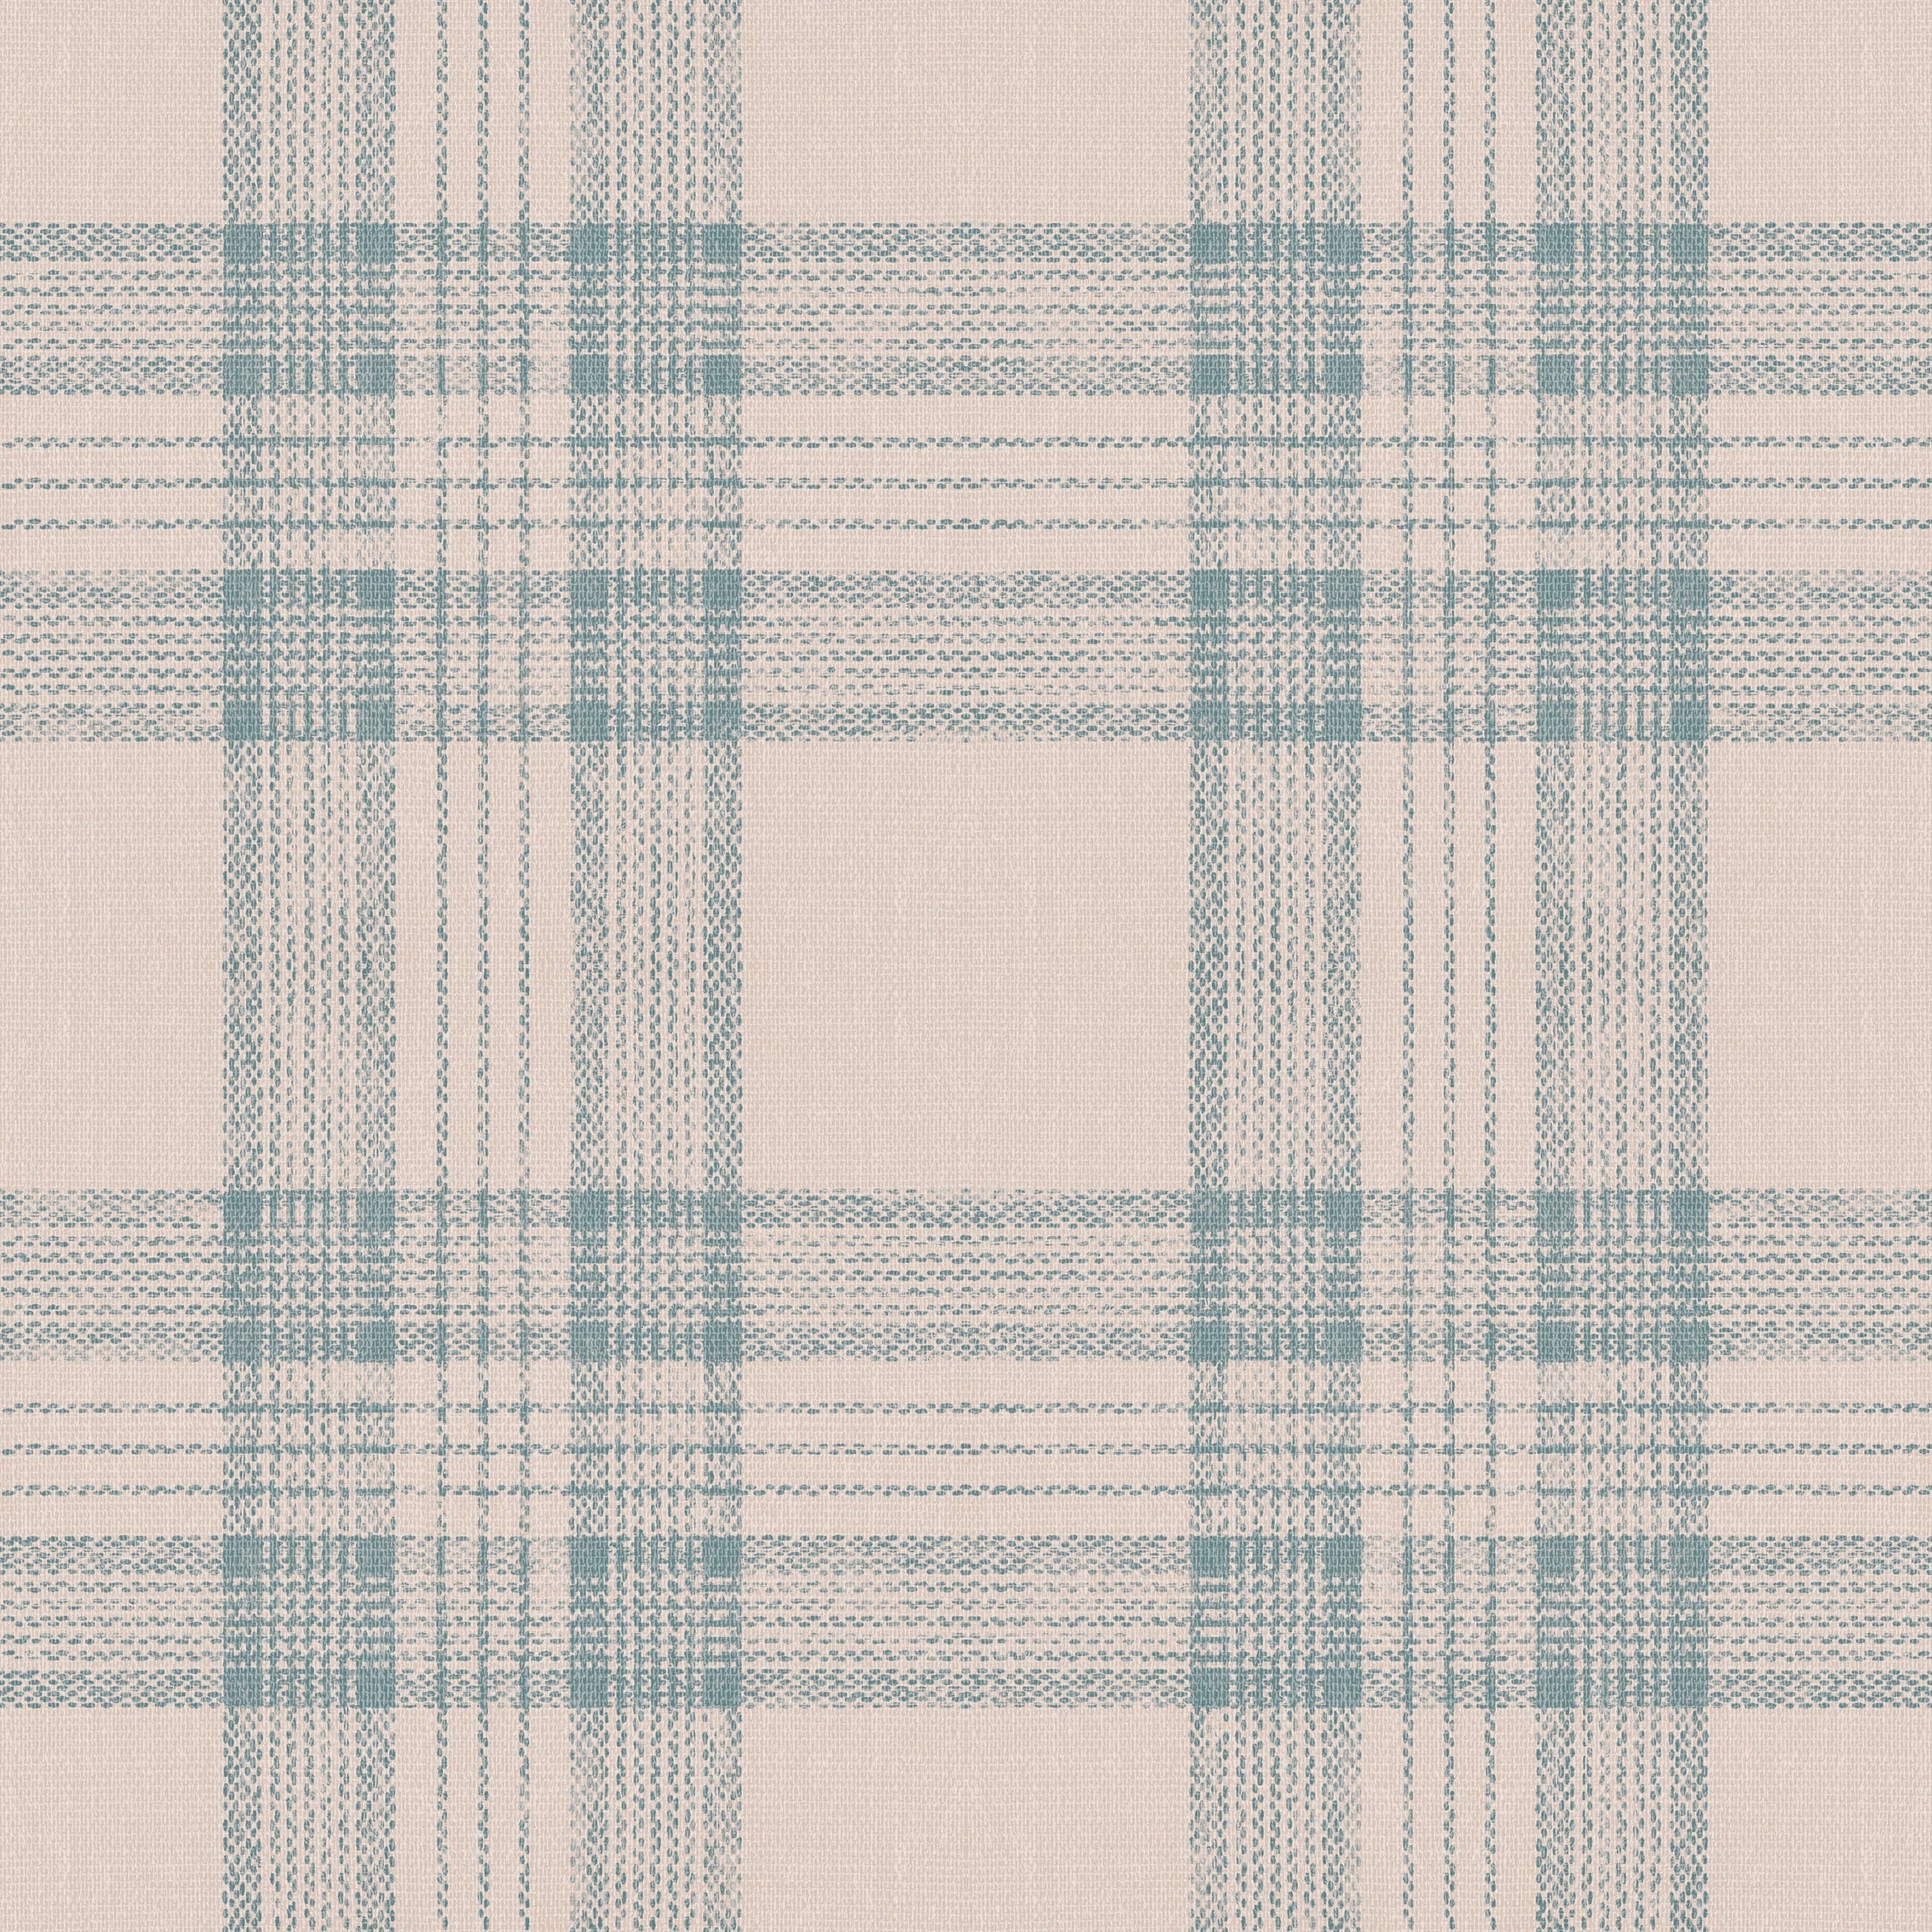 A close-up of the 'Plaid Wallpaper - Tartan Sand and Sky,' showcasing its elegant pattern with intersecting lines of sandy beige and sky blue over a textured off-white base. The design exudes a subtle rustic charm and sophisticated simplicity, perfect for creating a relaxed yet chic atmosphere in any room.